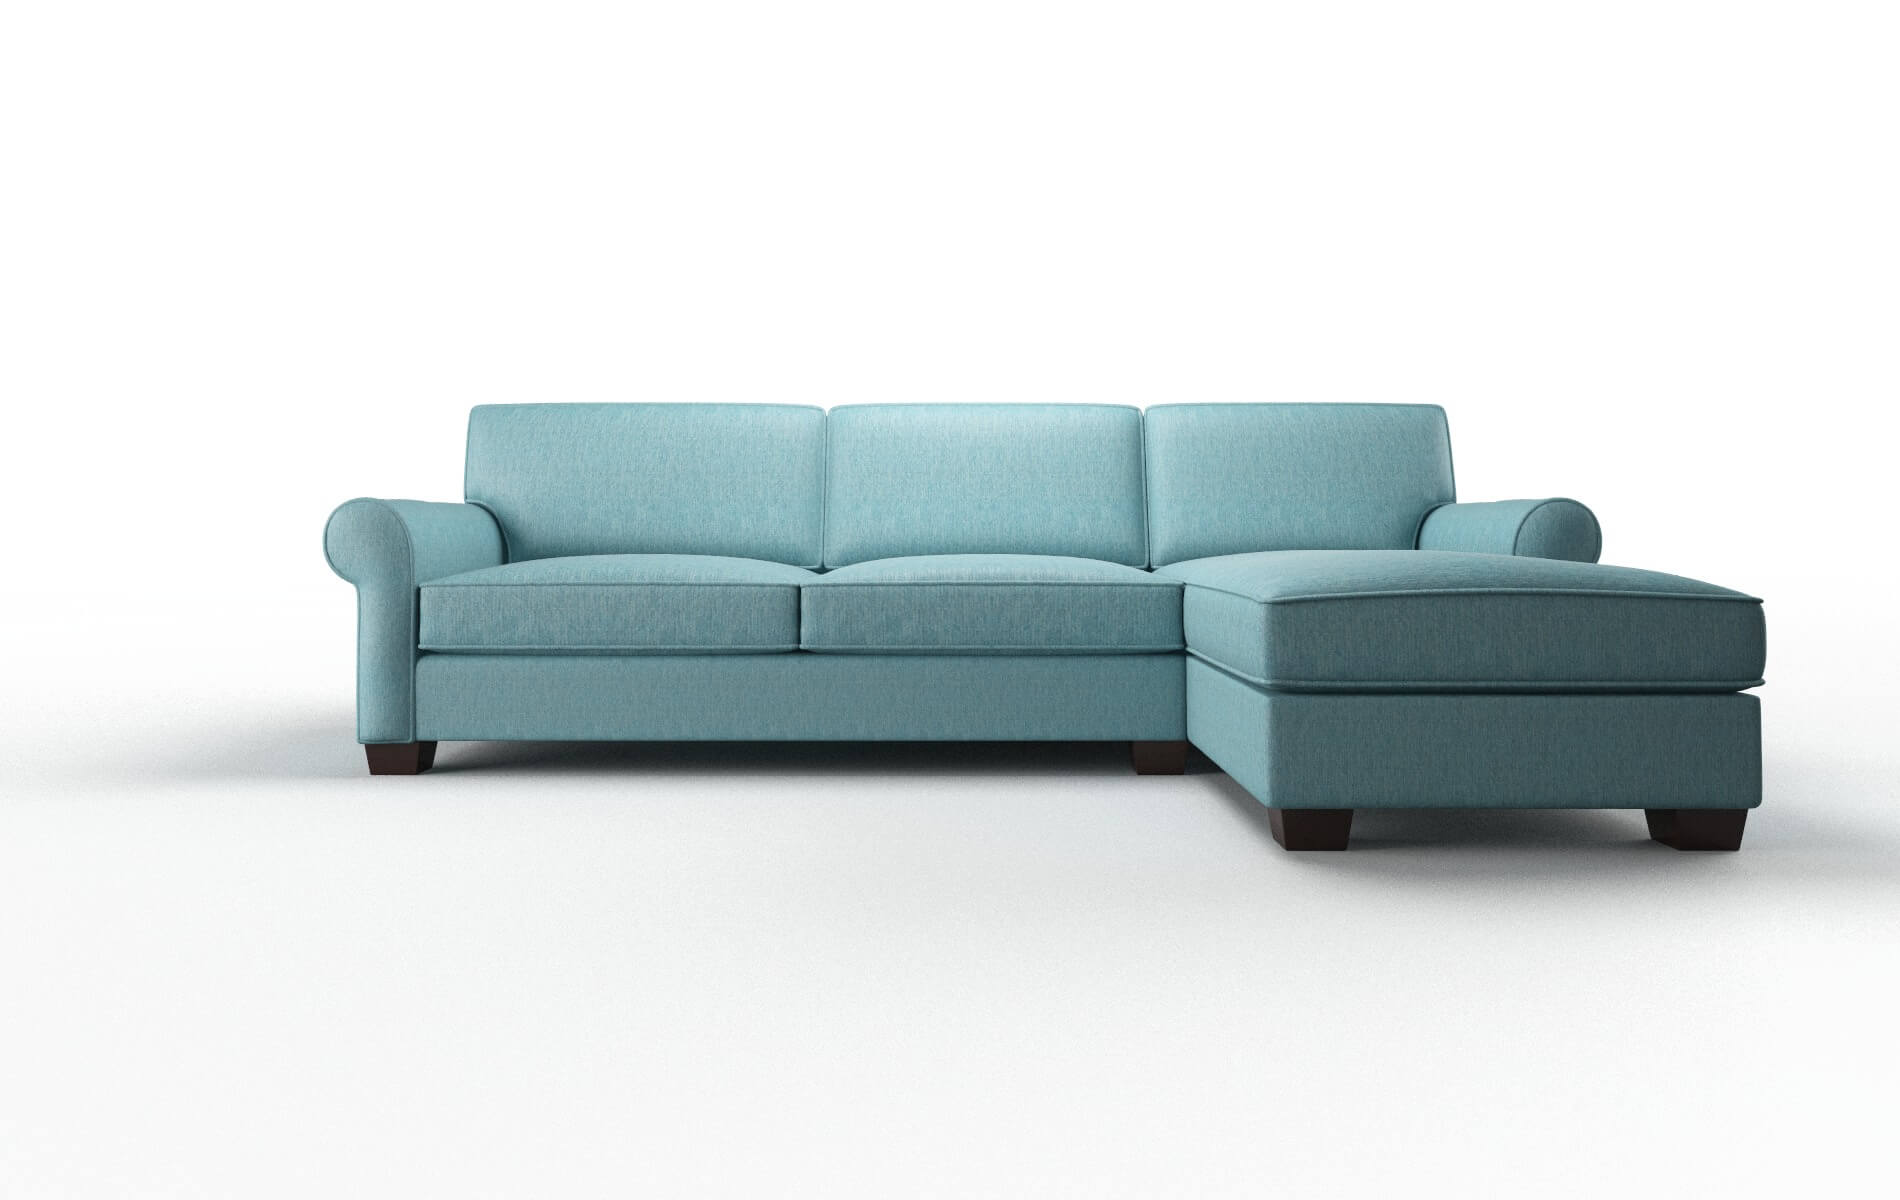 Isabel Cosmo Turquoise chair espresso legs